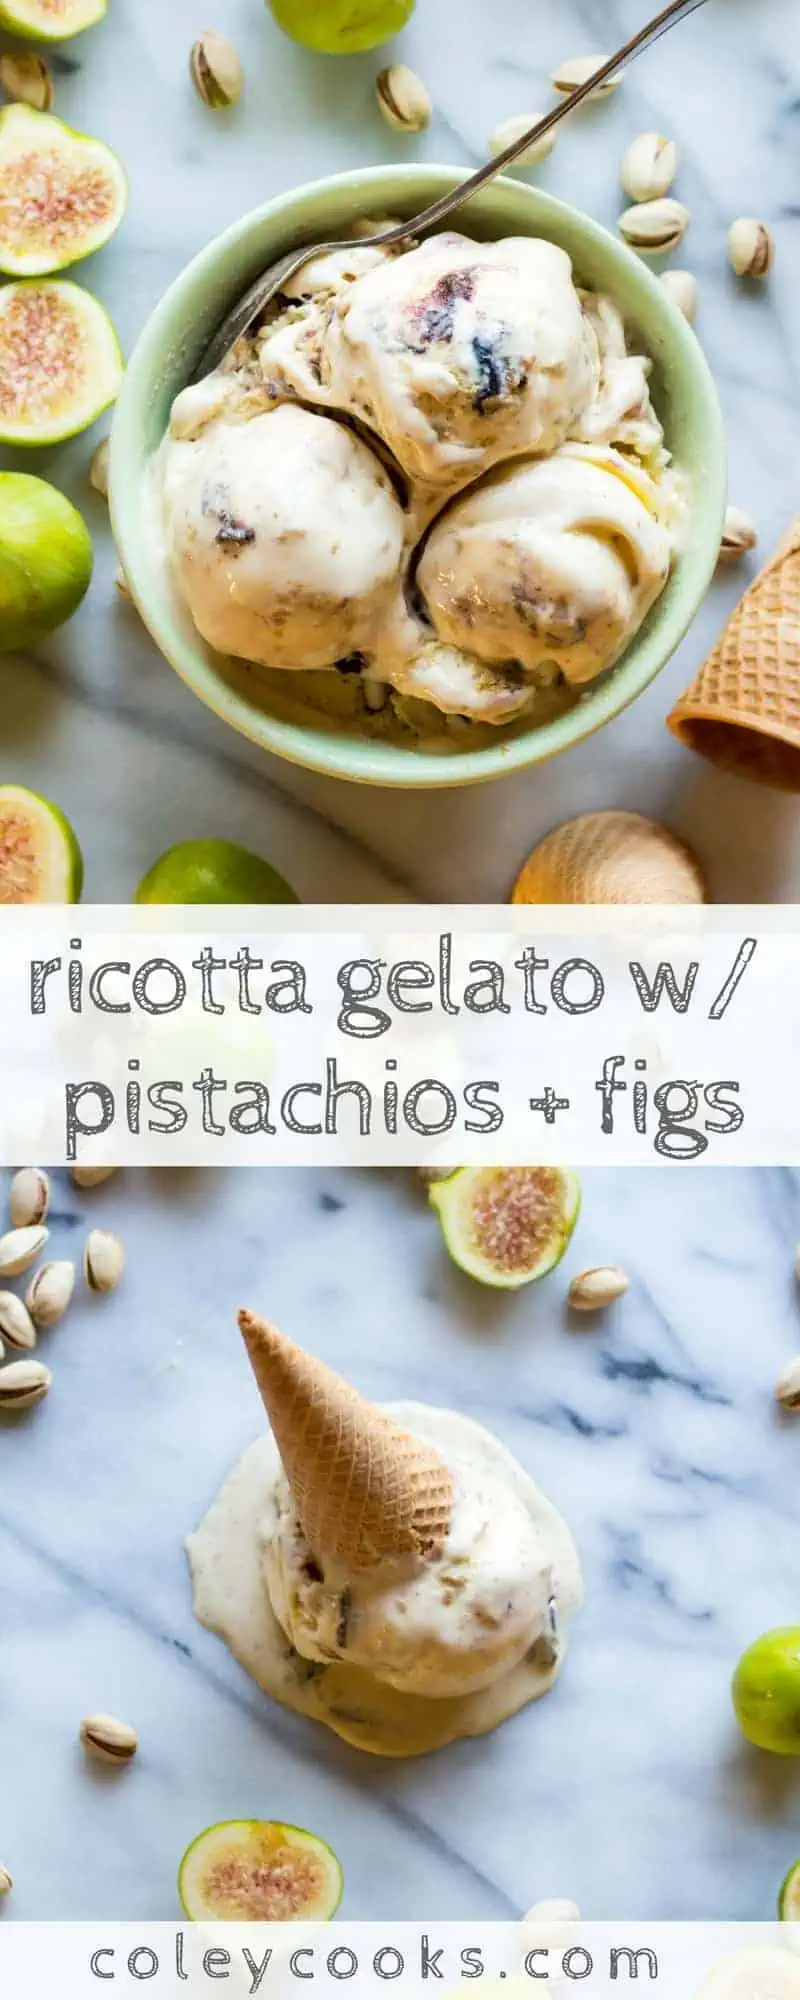 RICOTTA GELATO with PISTACHIOS + FIGS | This over the top gelato recipe combines all my favorite Italian flavors - ricotta with fig and pistachio! The best gelato flavor ever! #icecream #frozentreat #gelato | ColeyCooks.com